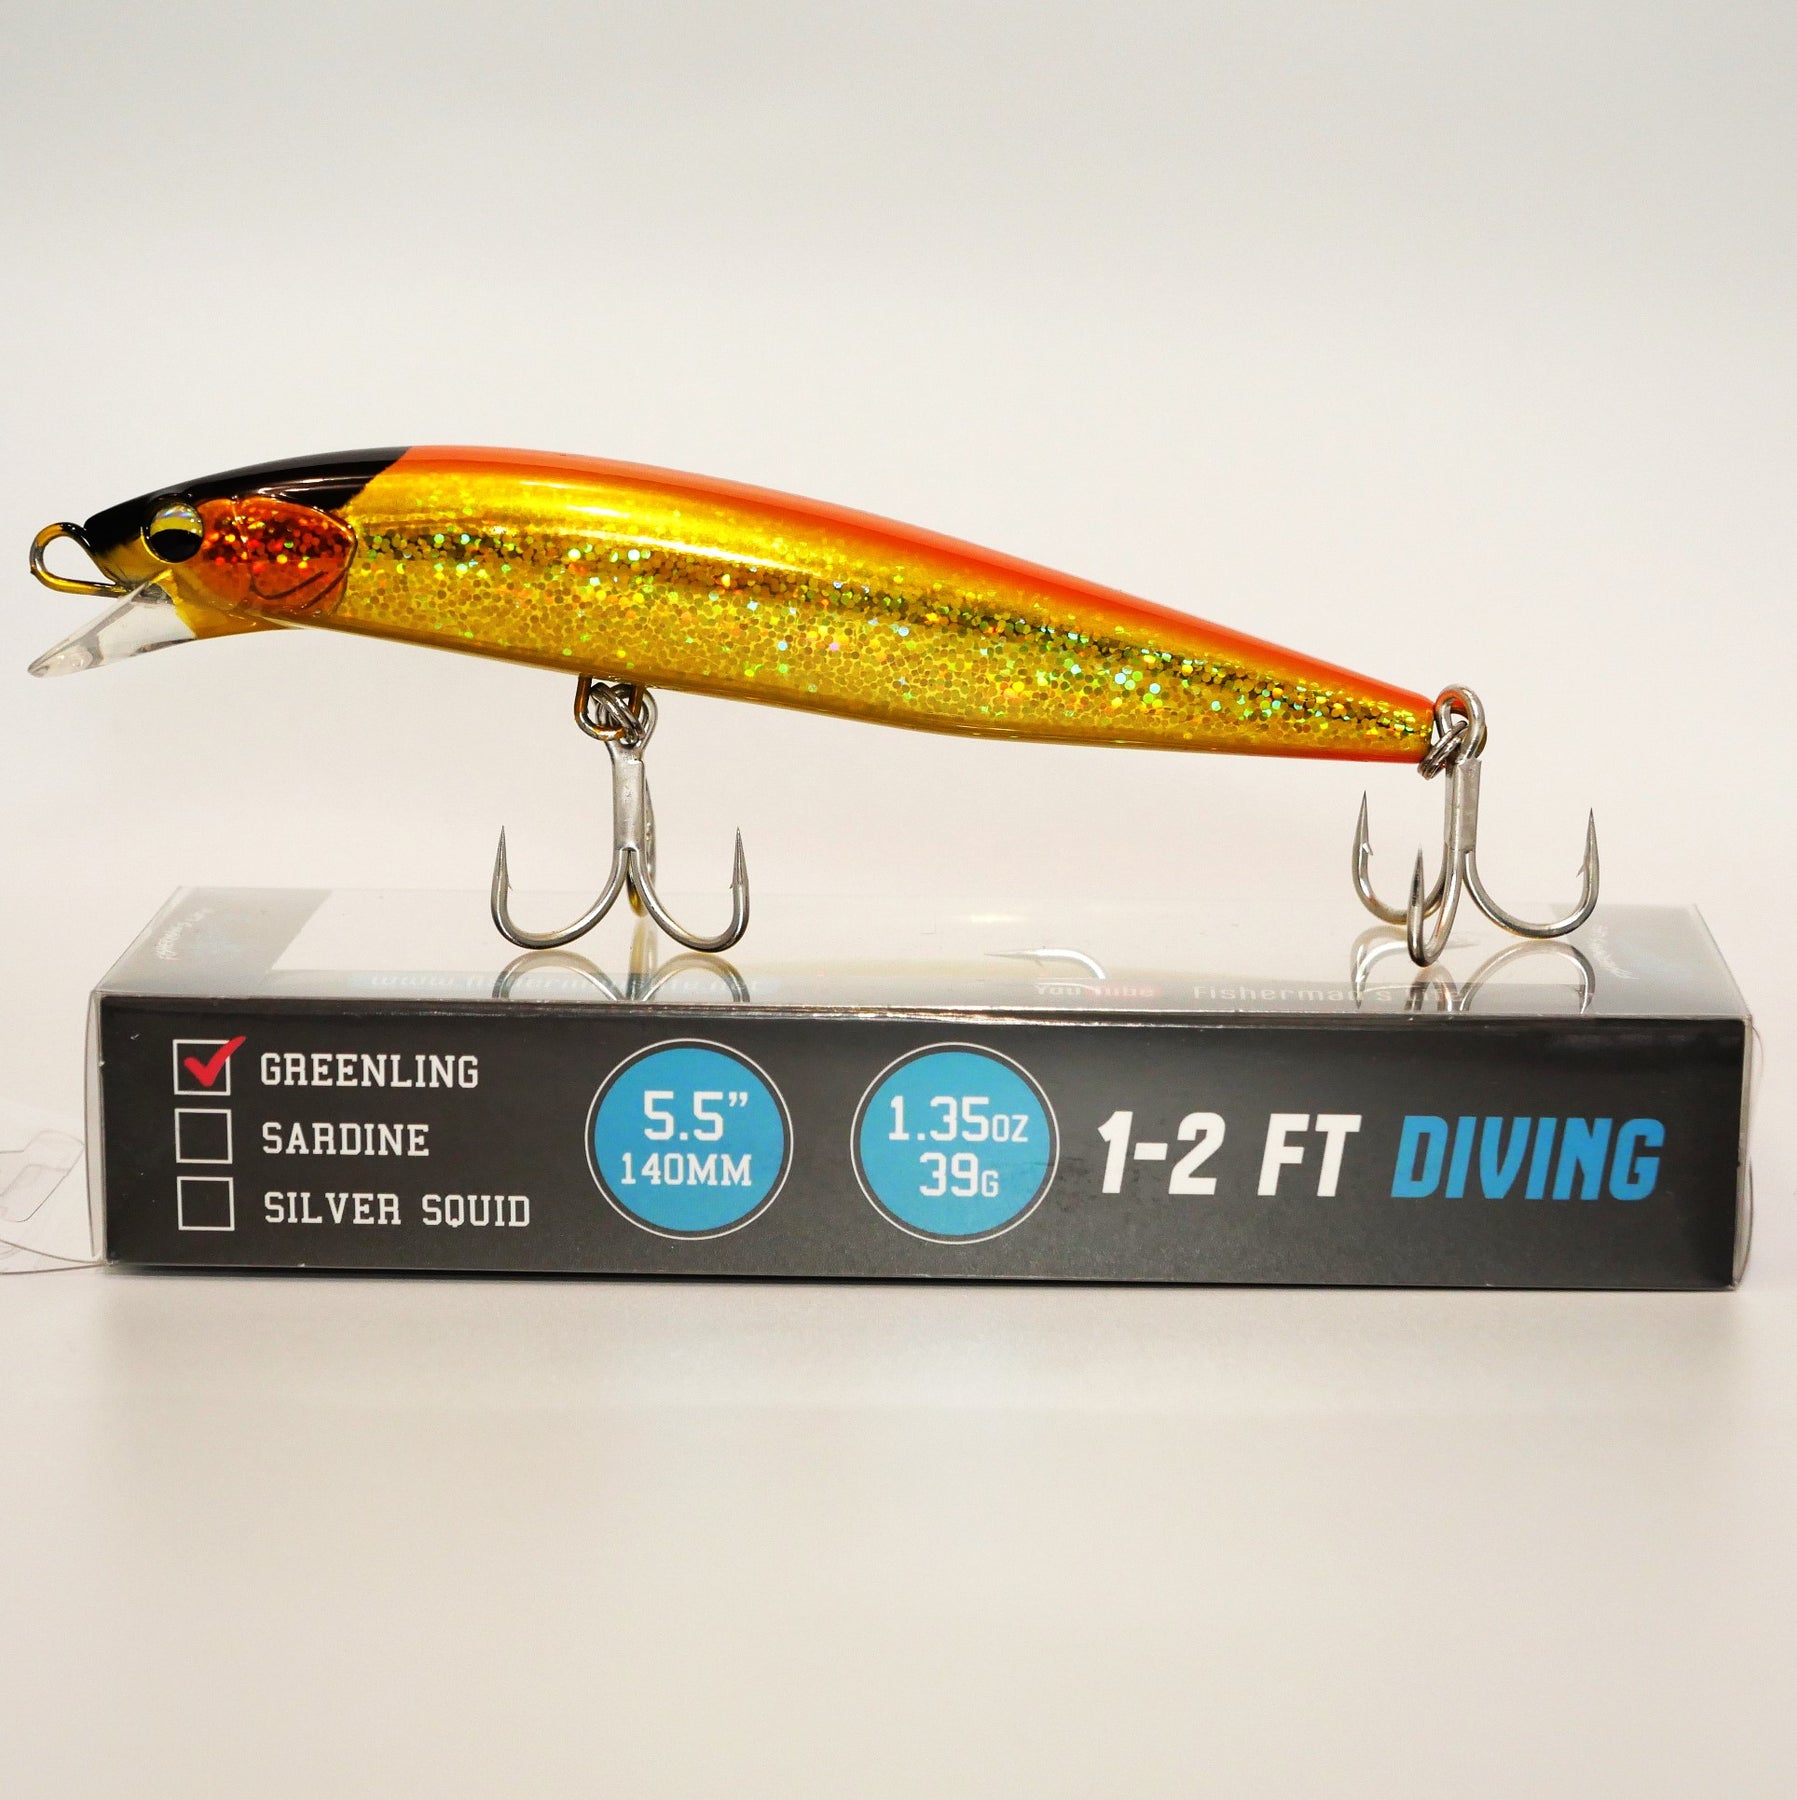 Fishing Bobber Decorative 28.5 Inches in Length, Circumference of 25 Inches  for Your Fishing Enthusiast 